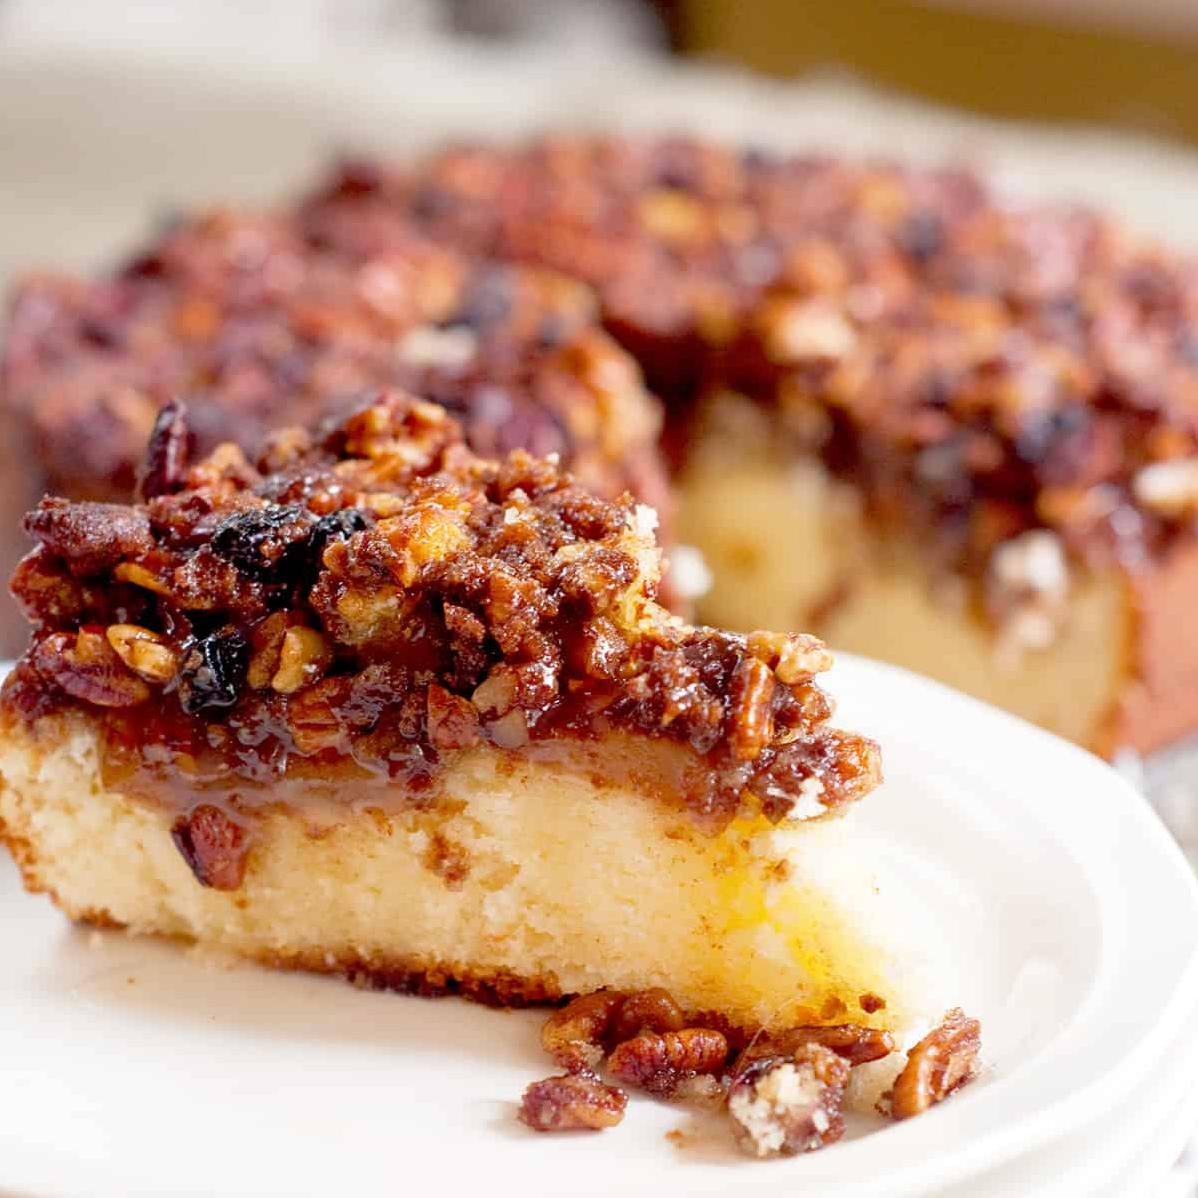  Make sure to sprinkle a generous amount of chopped pecans on top of the cake for added nutty flavor.